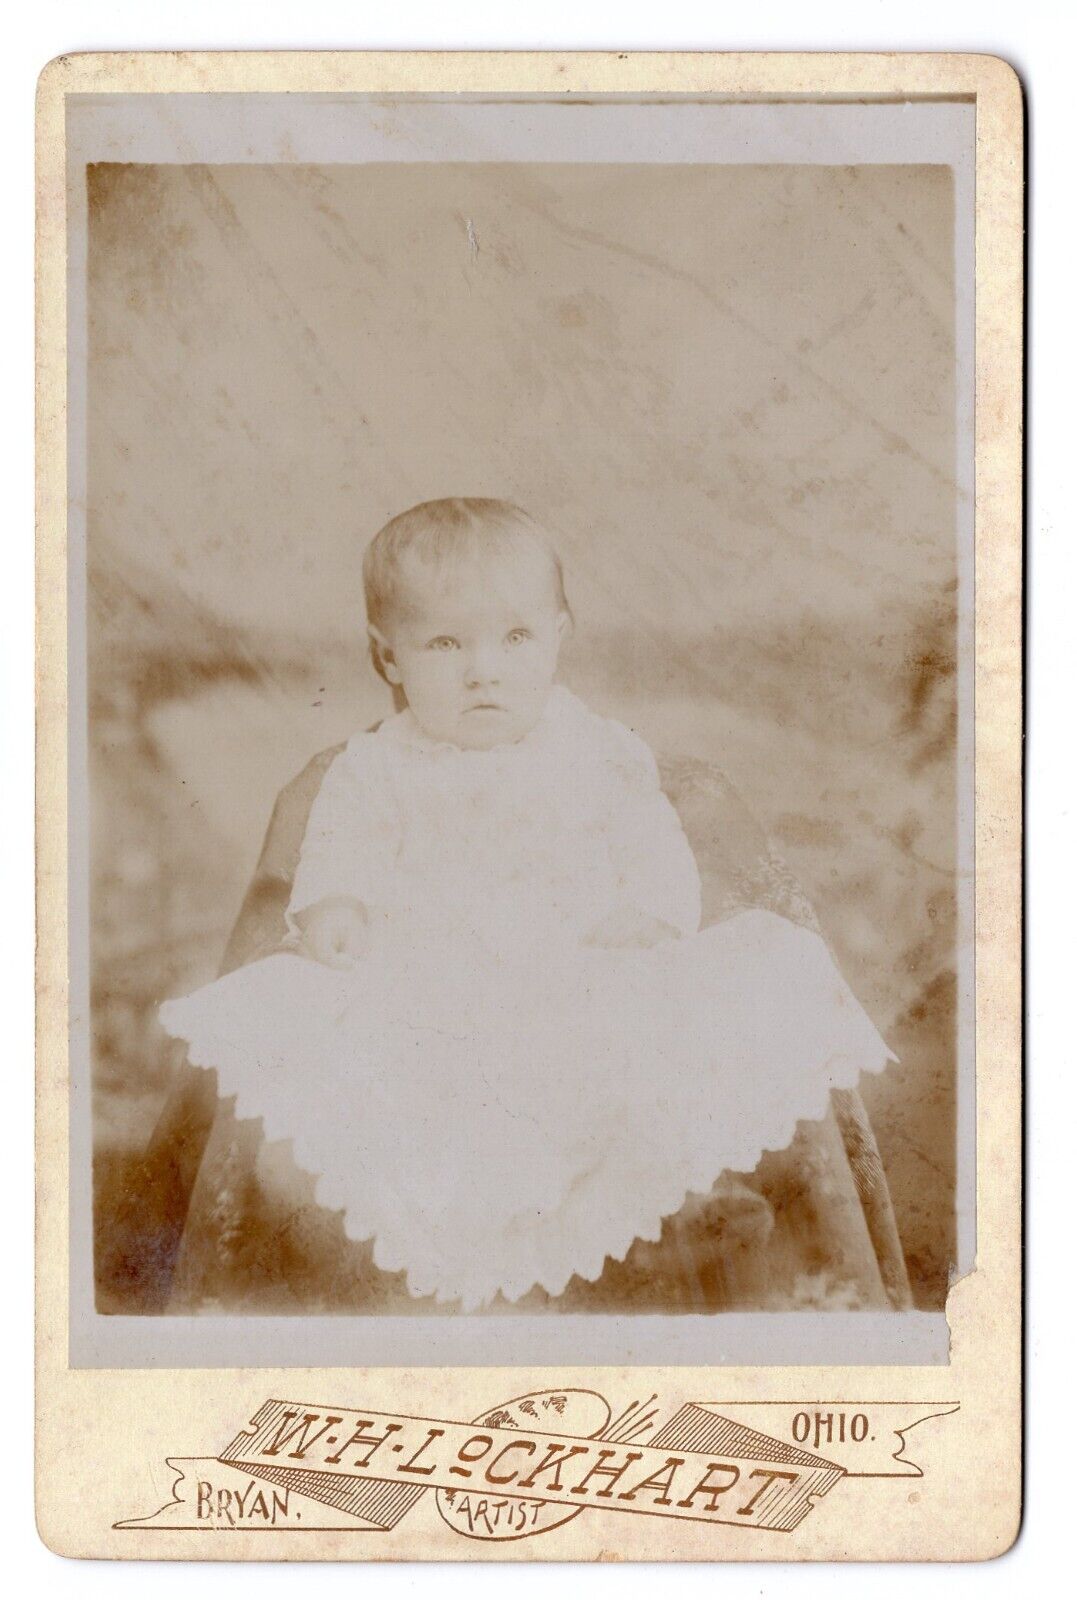 BRYAN OH 1890s Victorian BABY Cabinet Card by W. H. LOCKHART